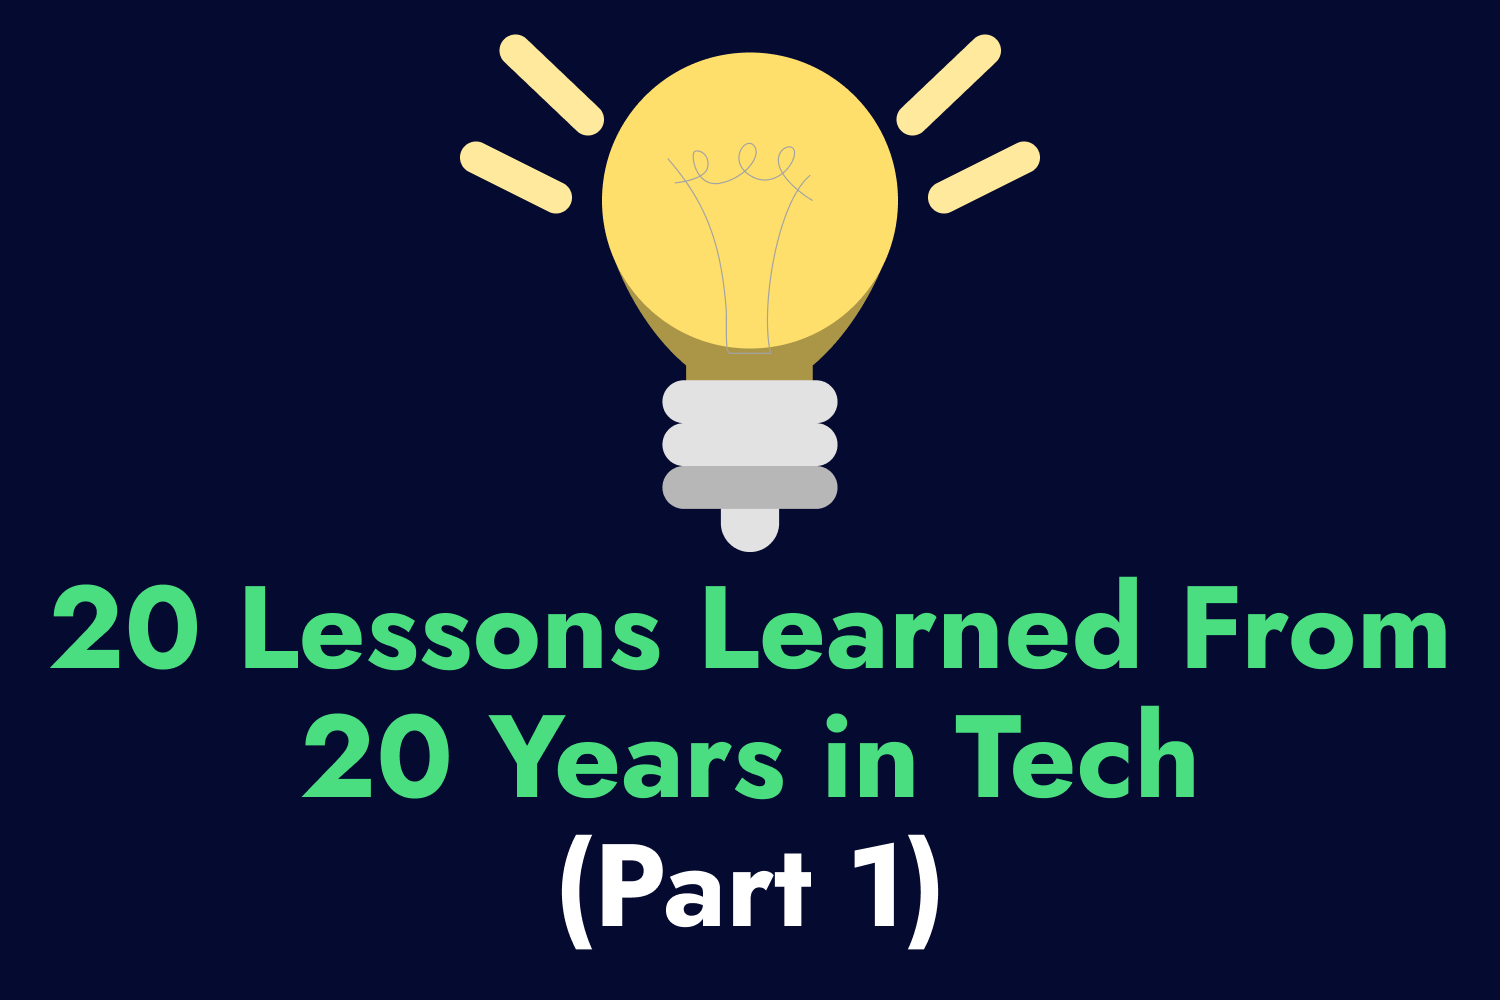 20 Lessons Learned From 20 Years in Tech: Part 1